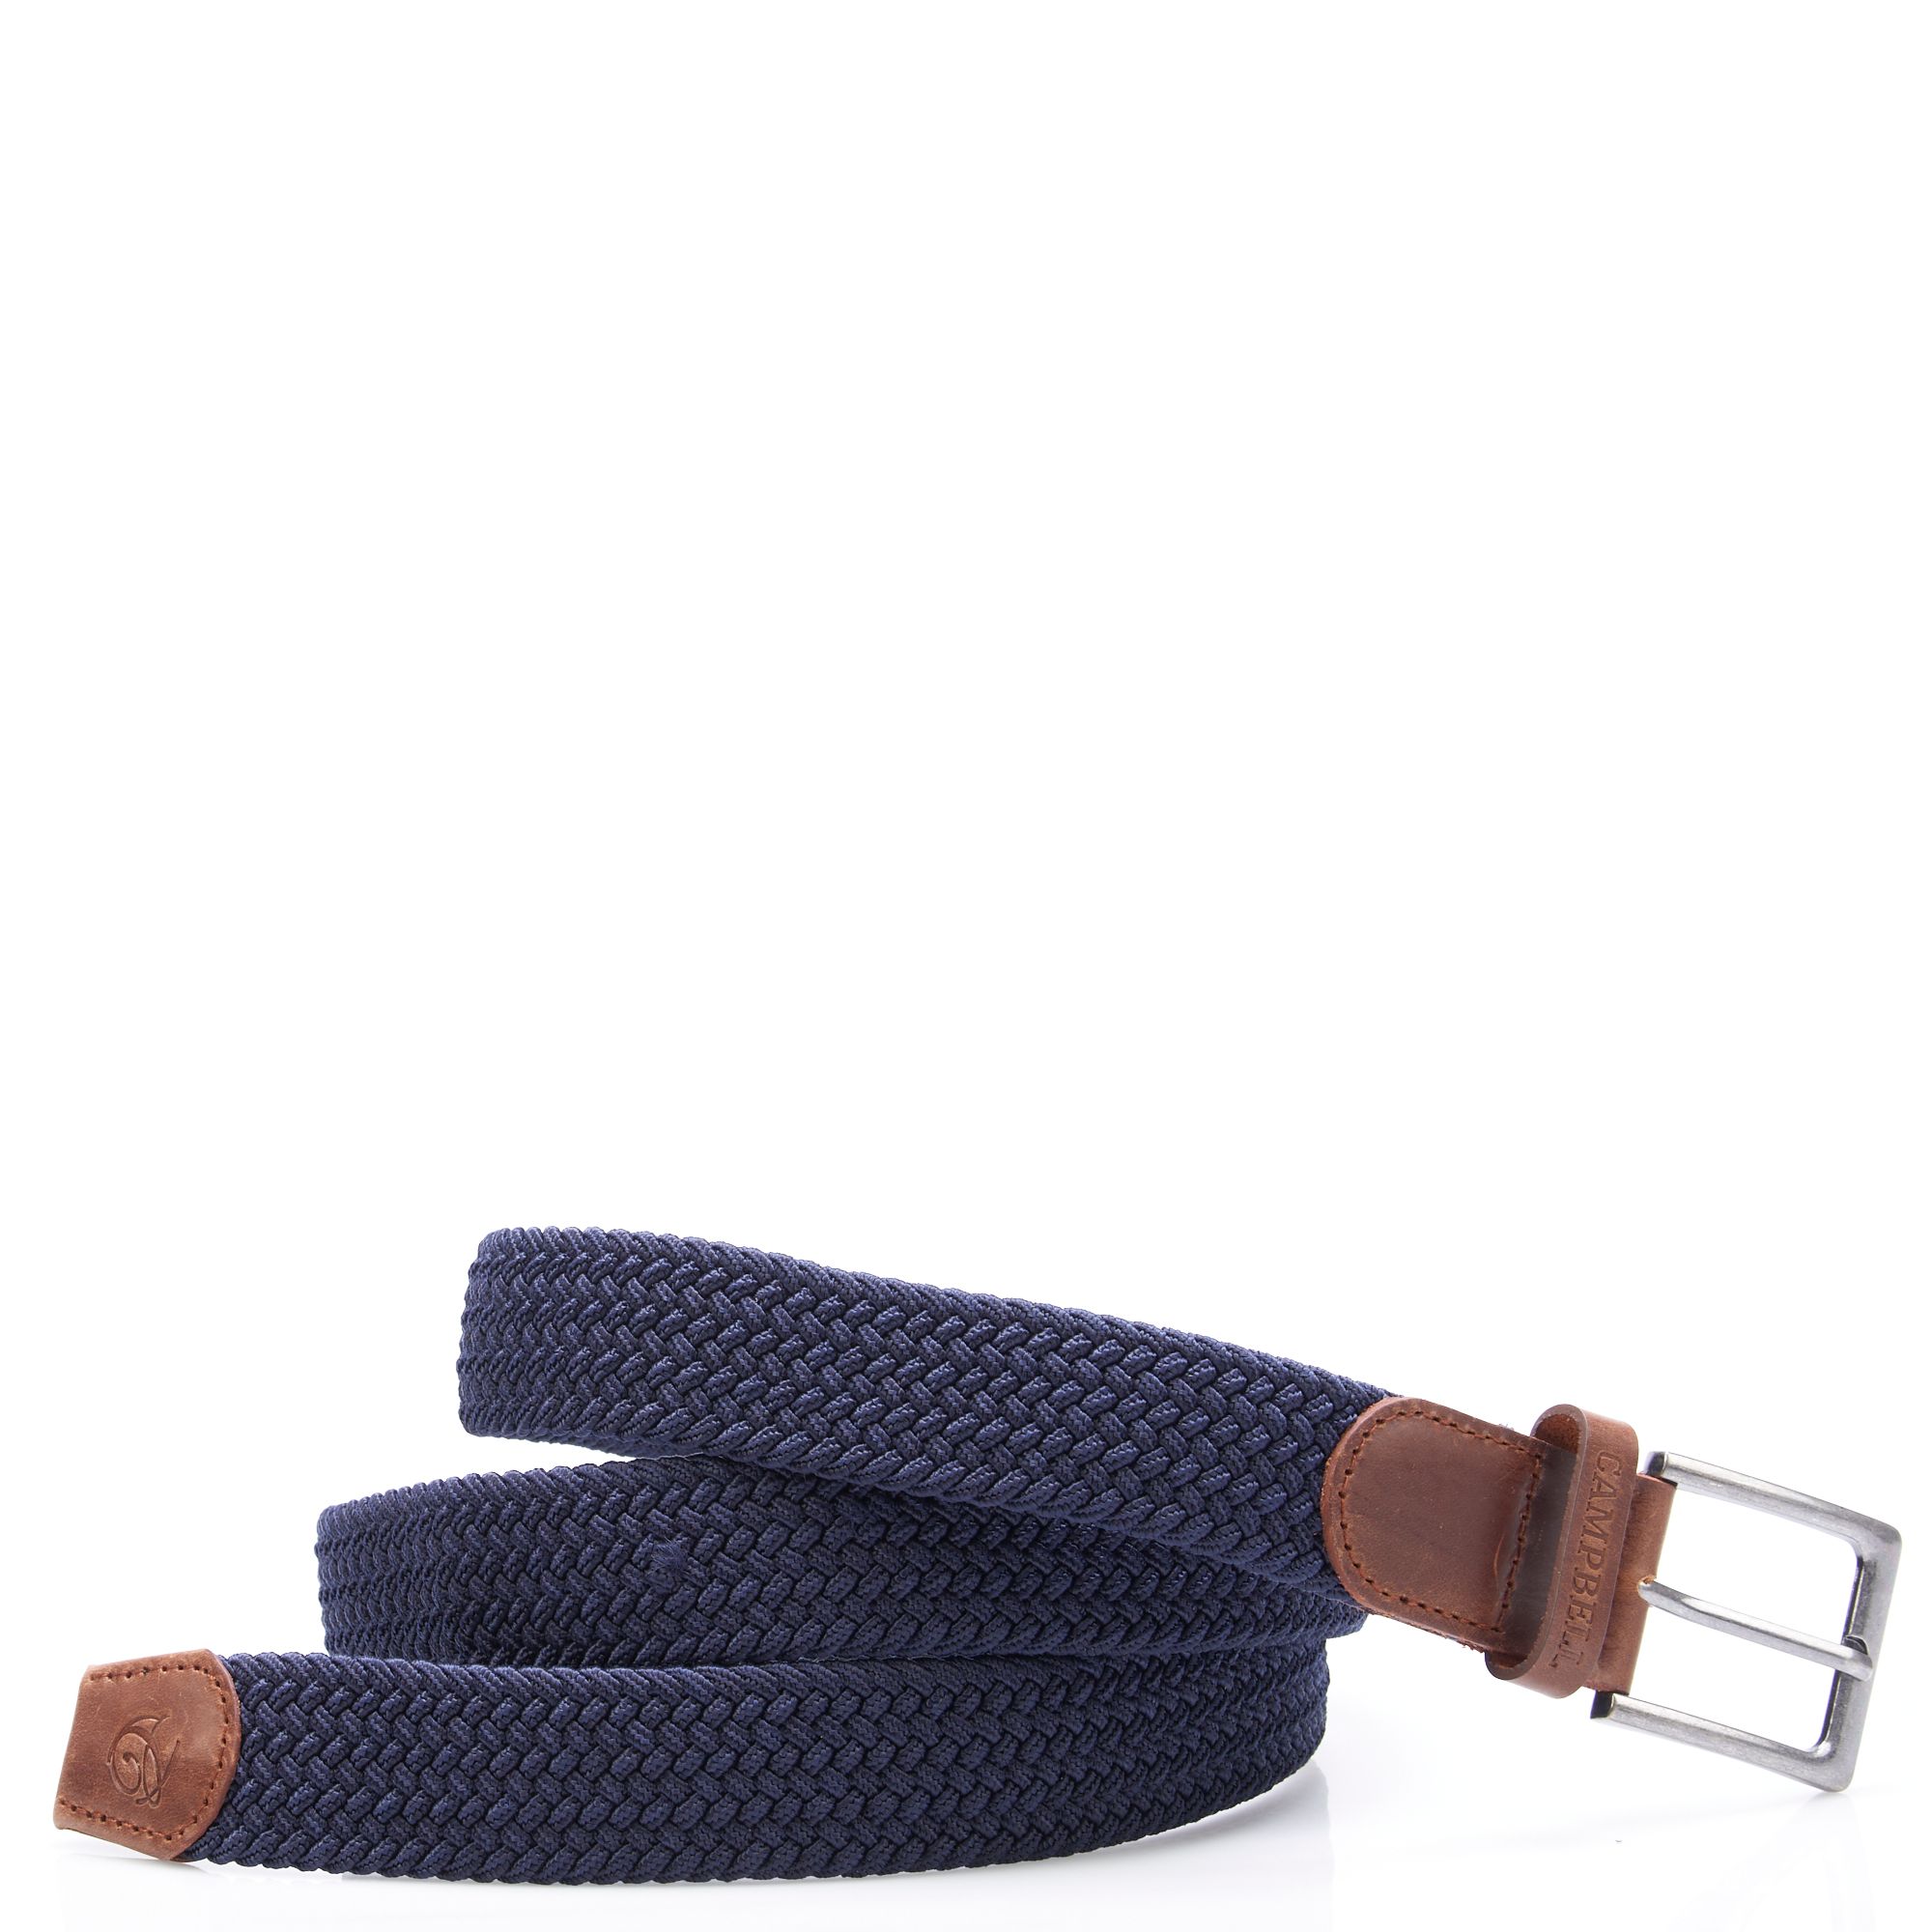 Campbell Classic Casual riem Donkerblauw uni 077556-002-105